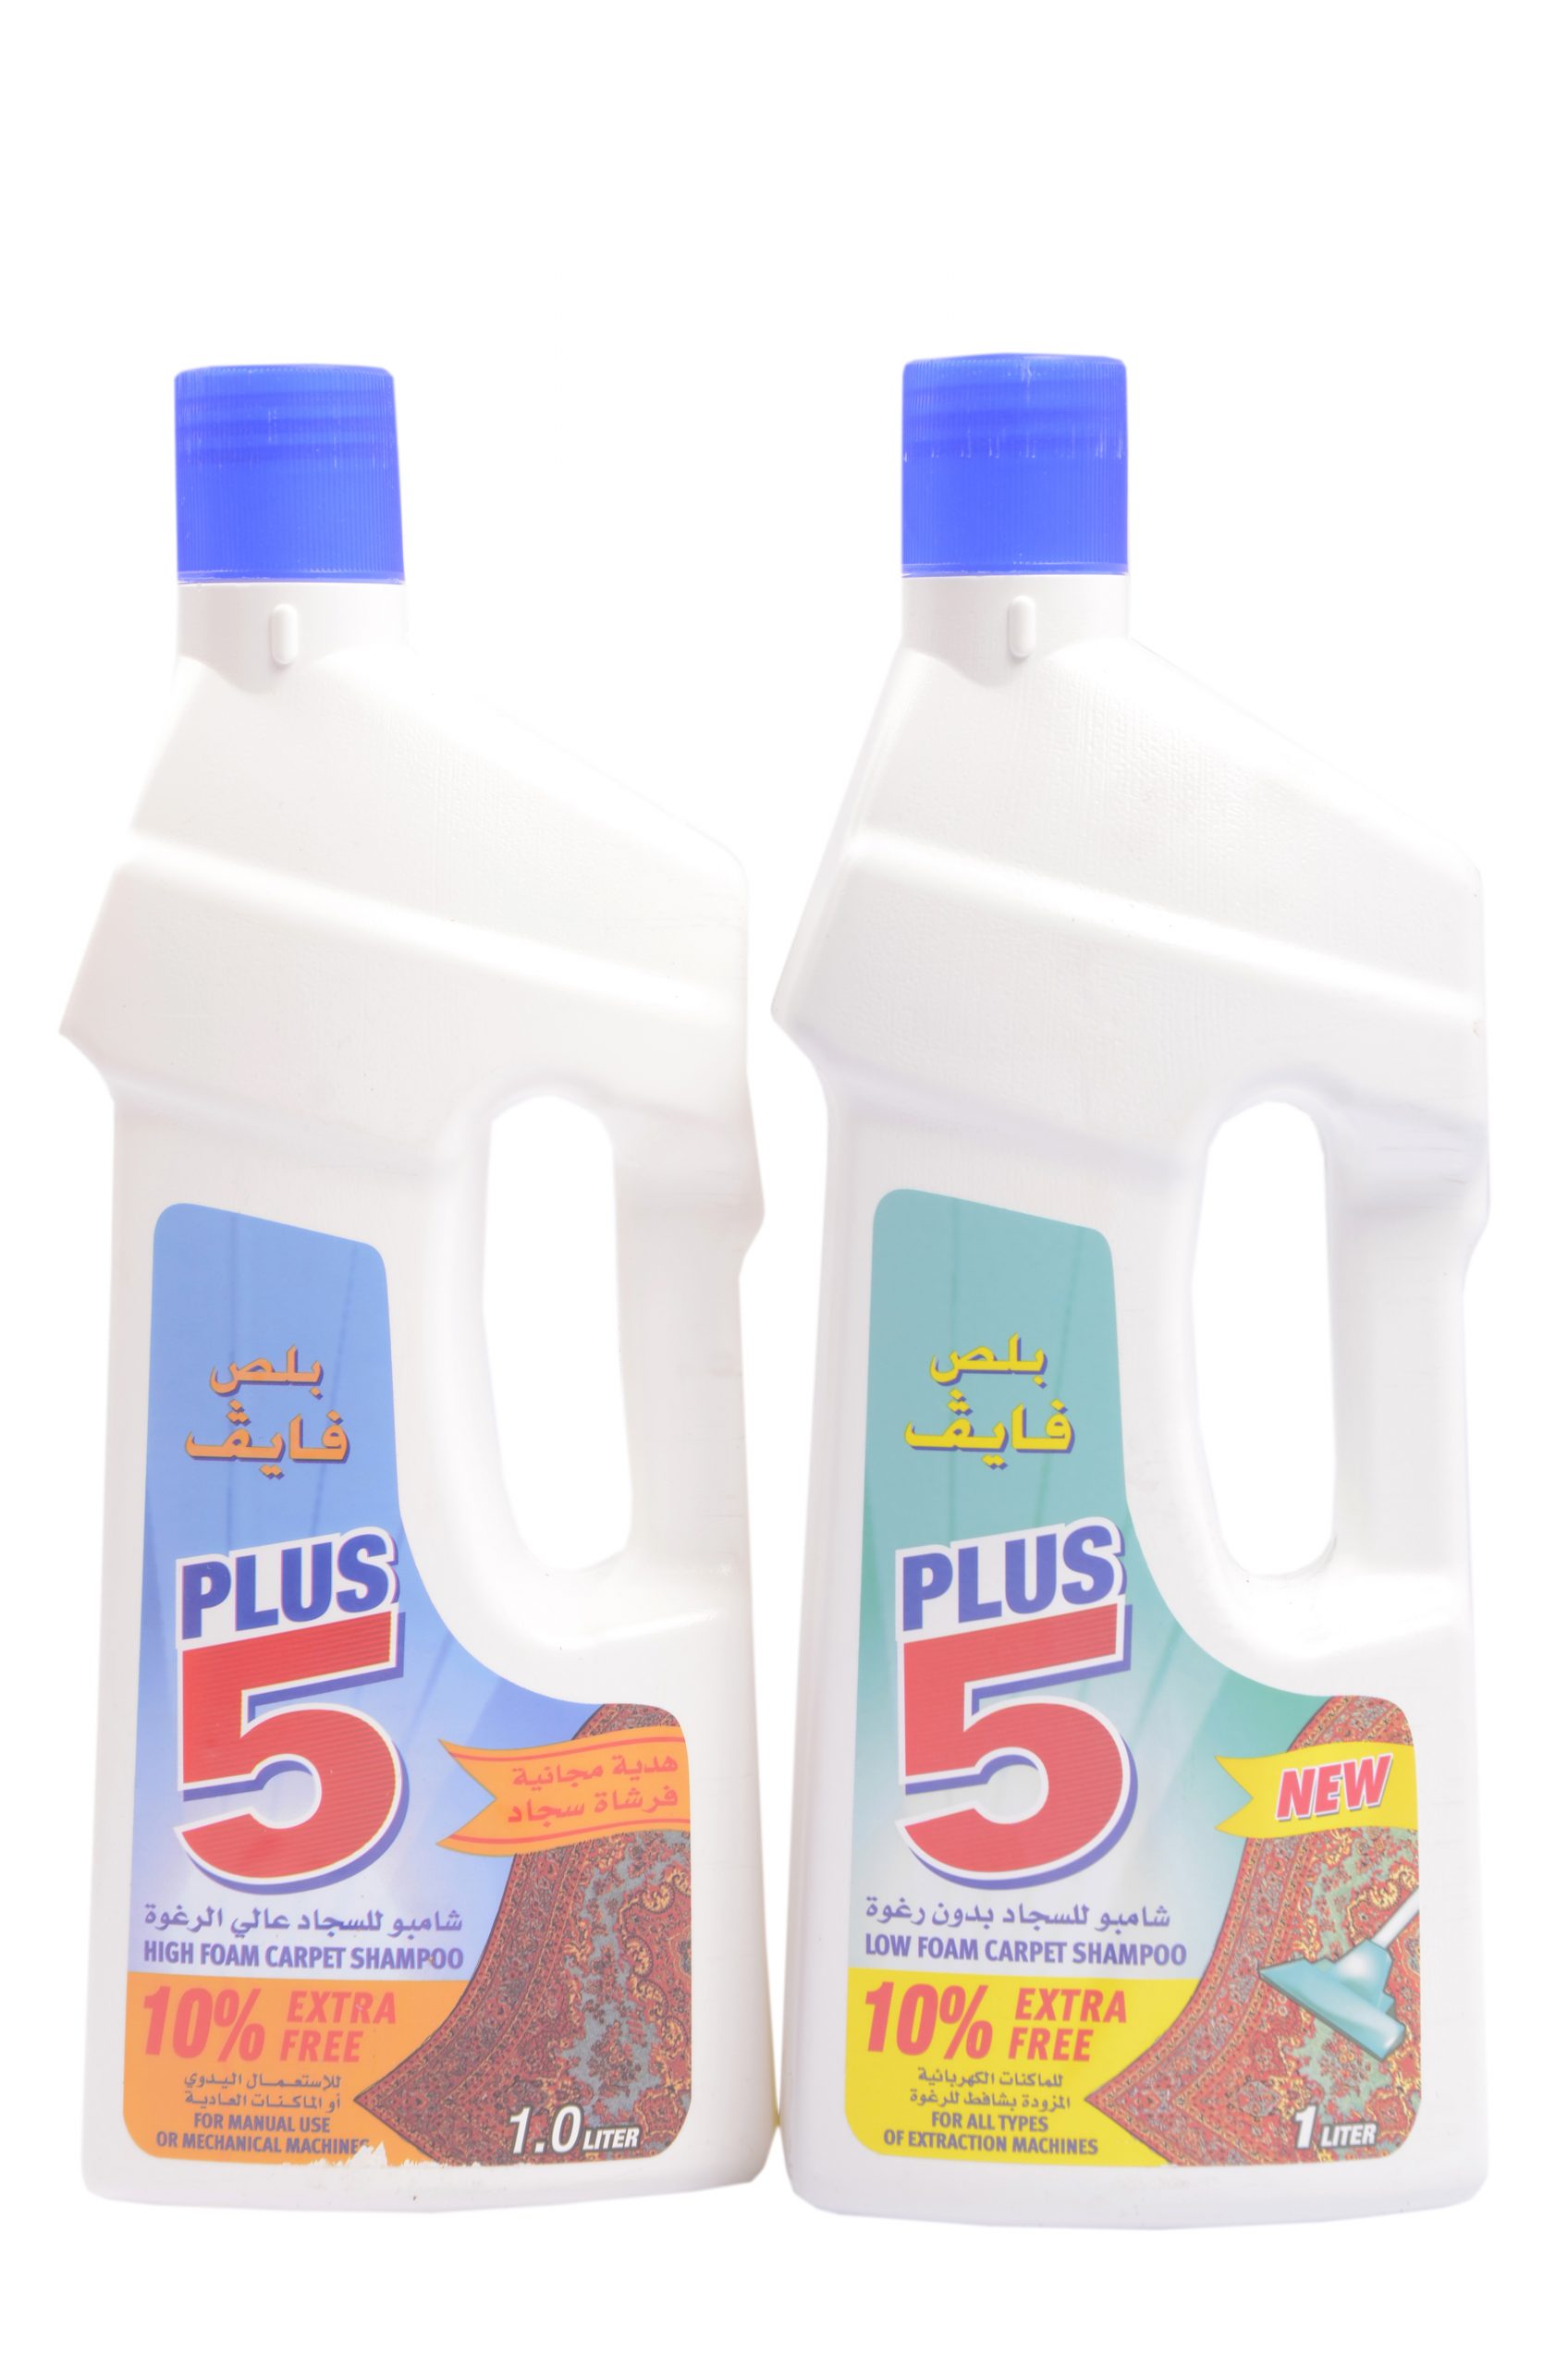 Plus 5 
	
	Carpet Shampoo Plus 5
	 |  Detergents & Cleaners |  Cleaning Materials |  House Ware